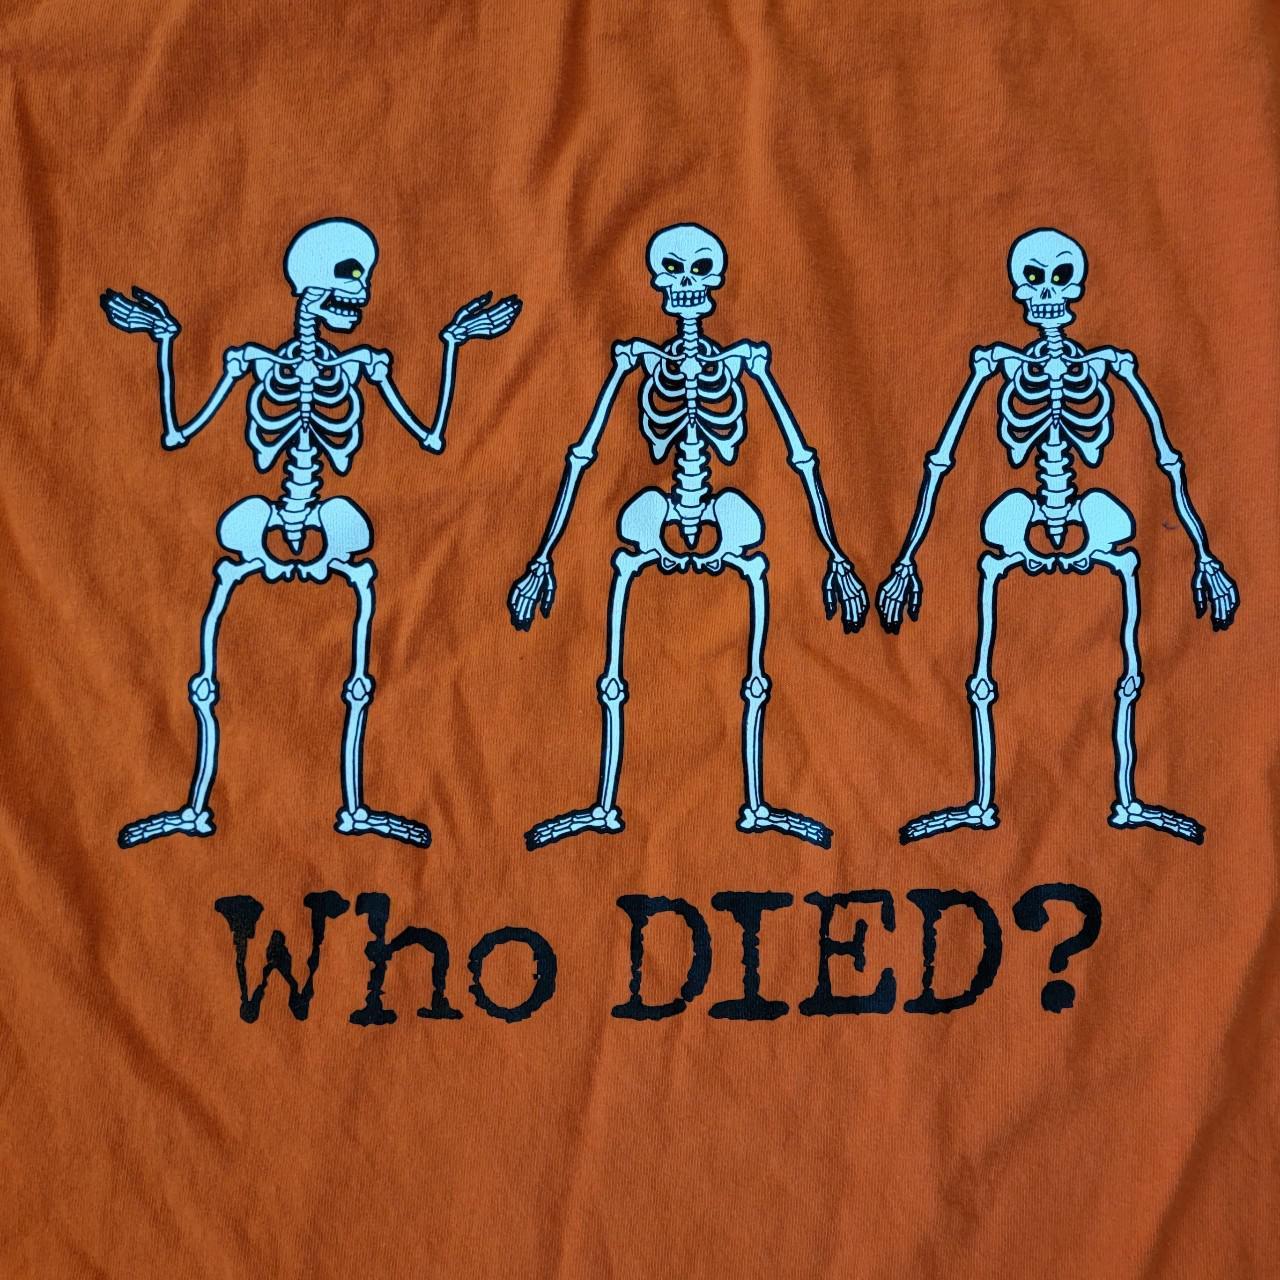 Product Image 2 - "Who Died?" Skeleton T-Shirt

Brand -